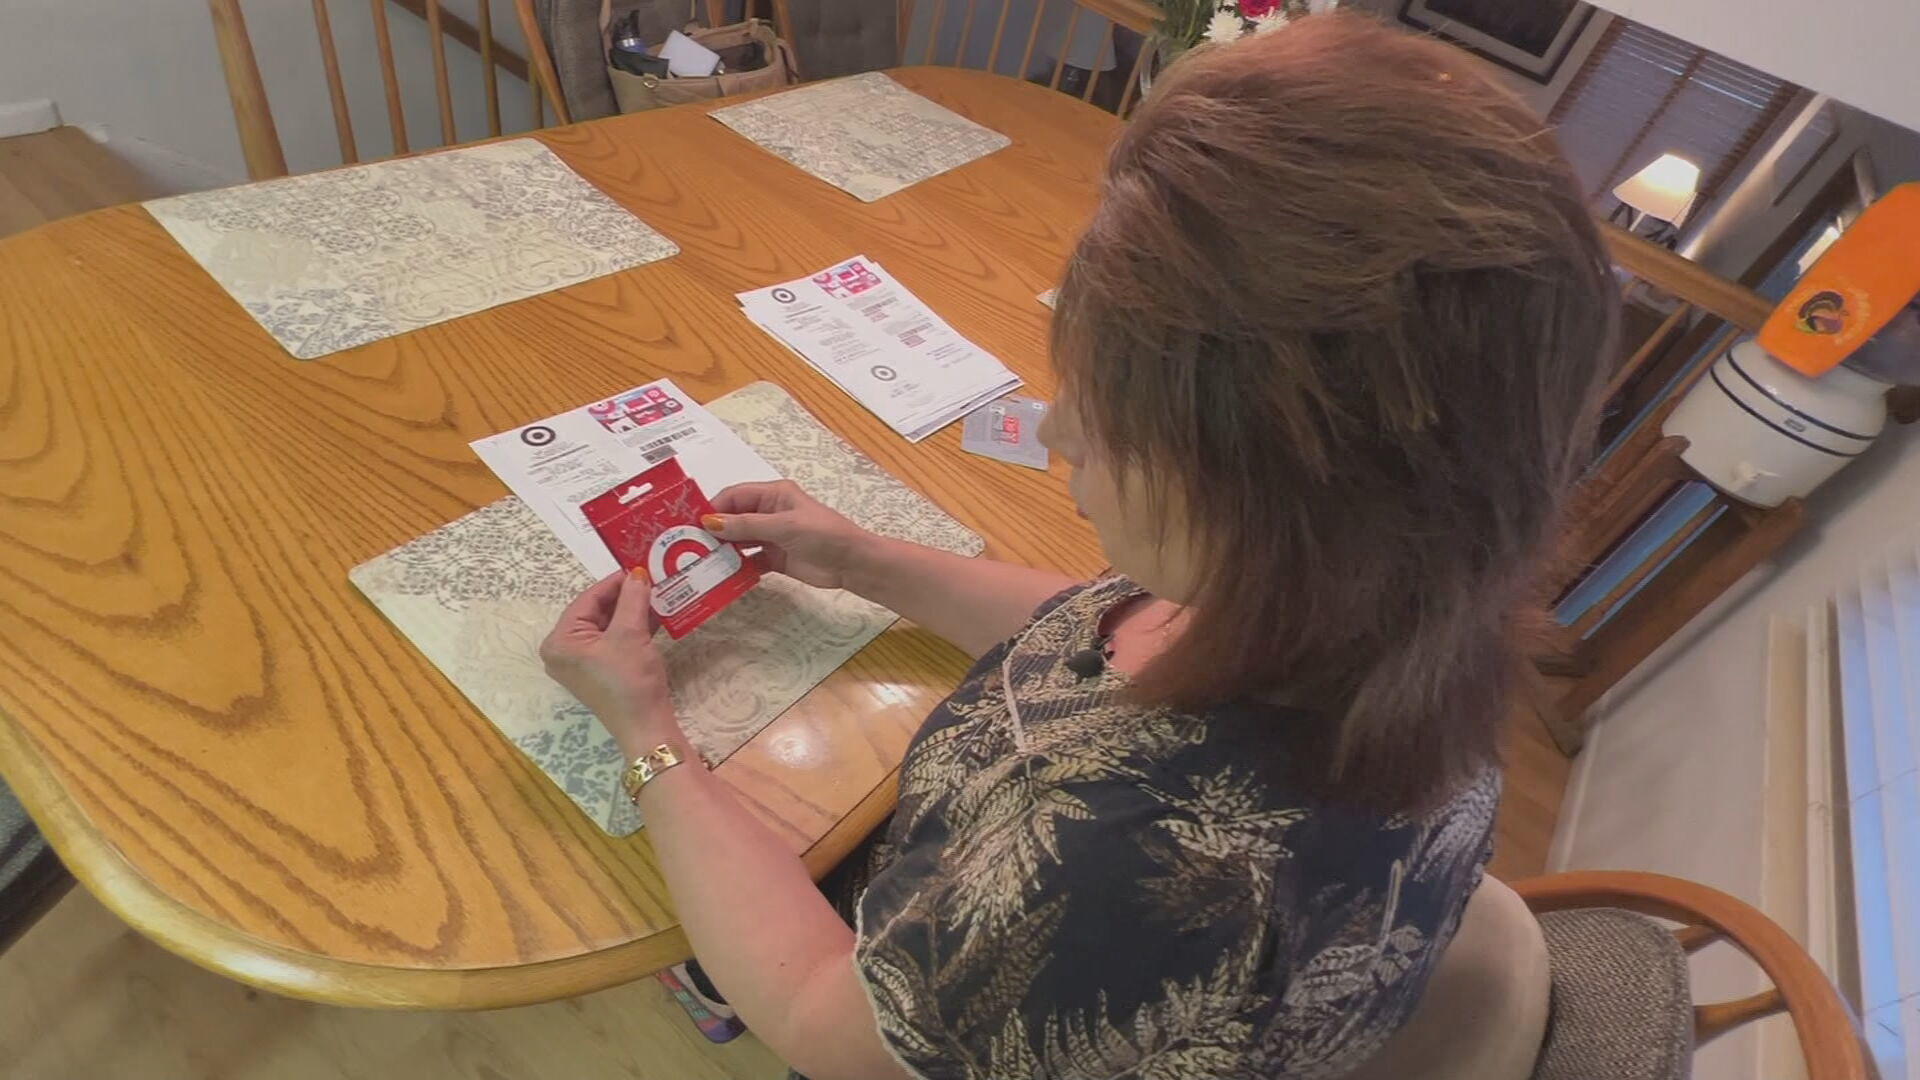 Woman warns consumers about gift card tampering scam